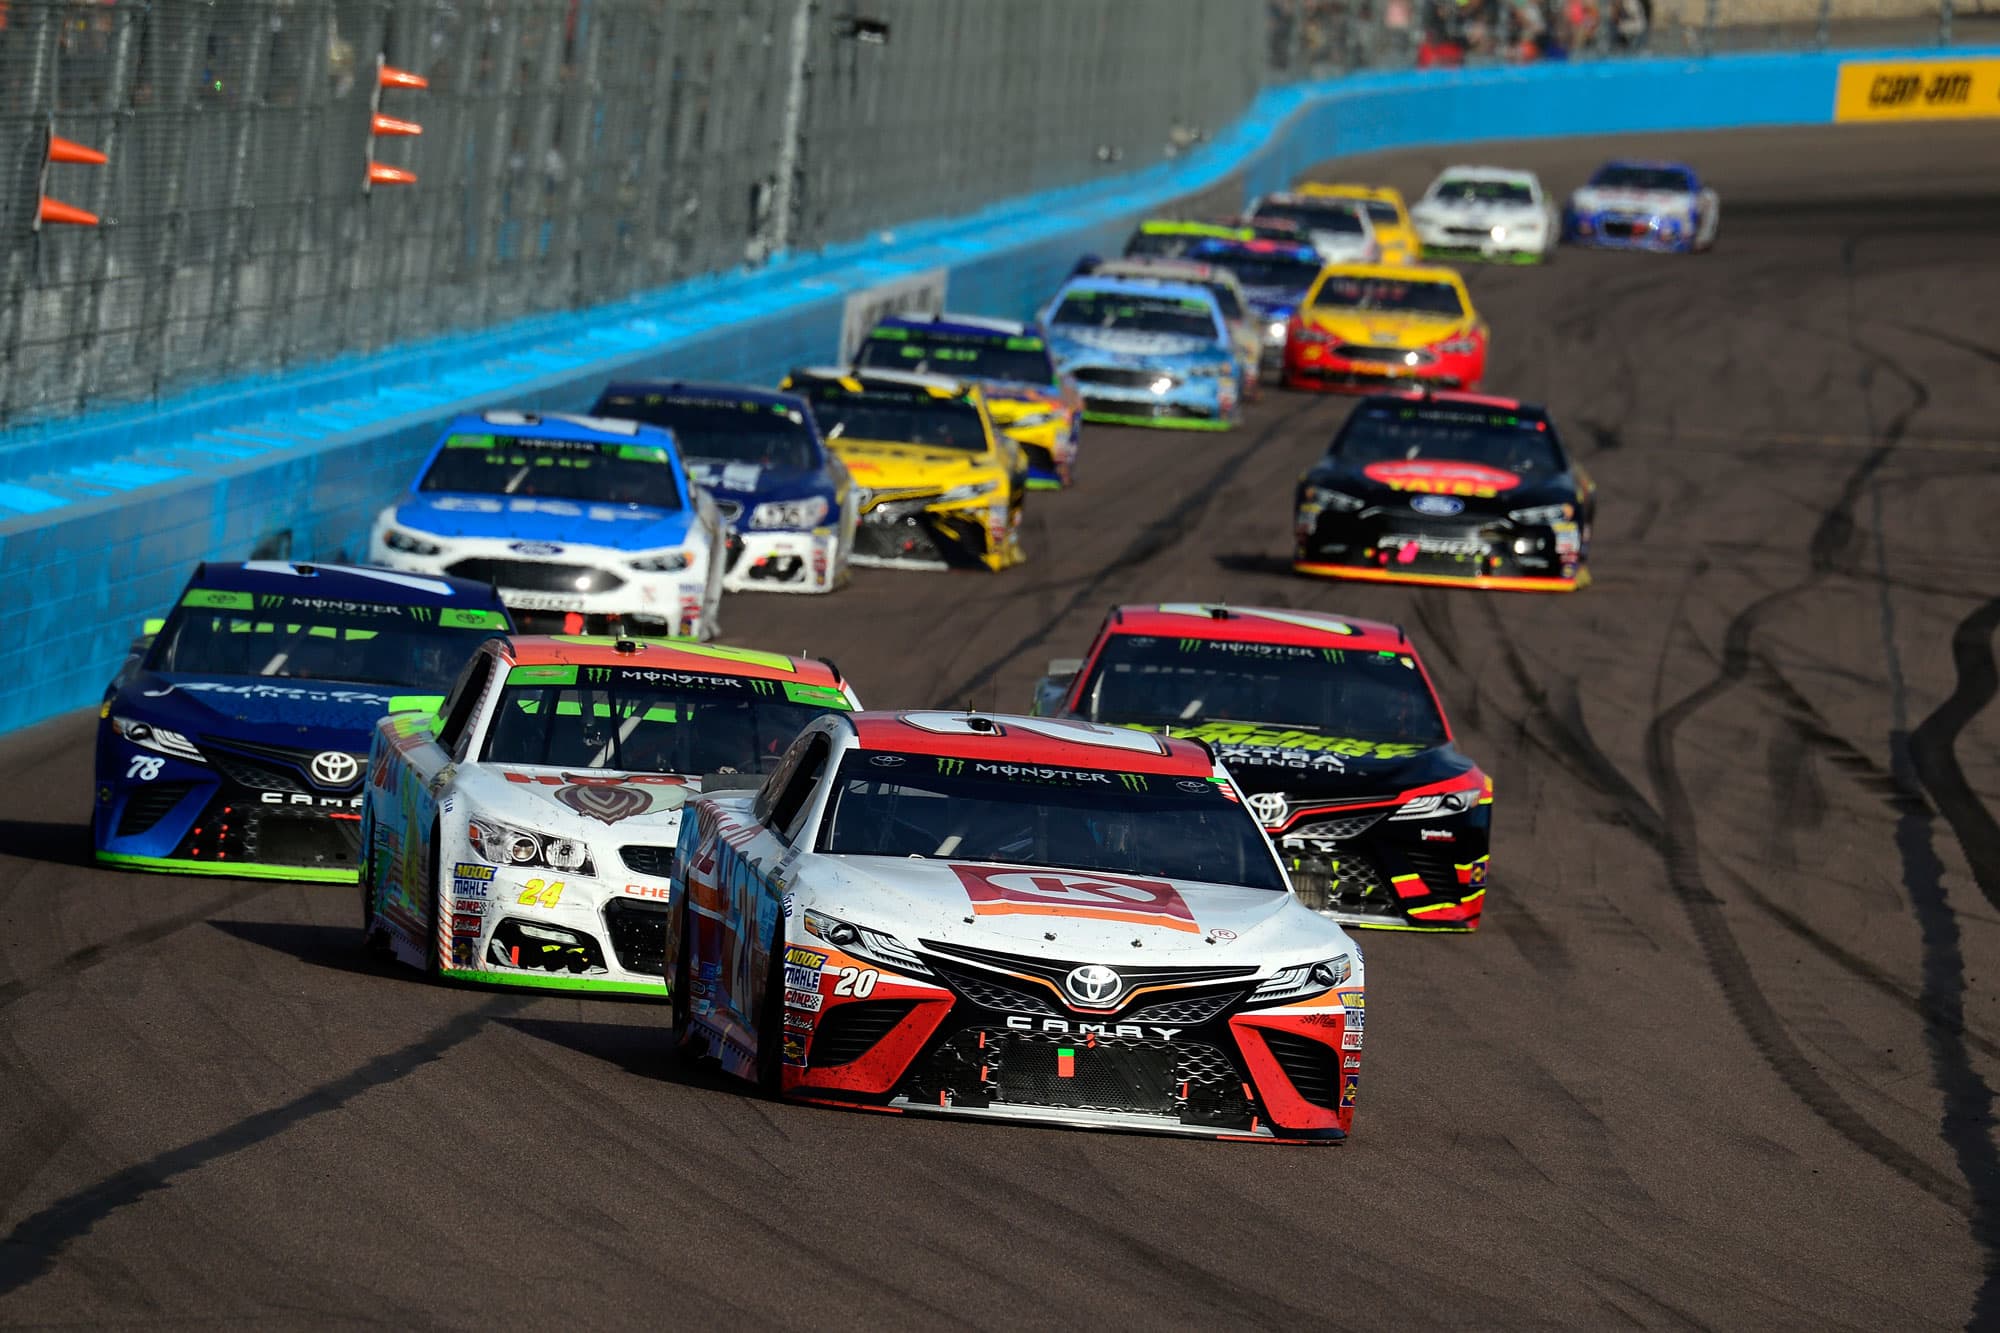 Nascar Drivers Win Big Prize Money But They Say It Takes Just As Much To Make The Cars Run